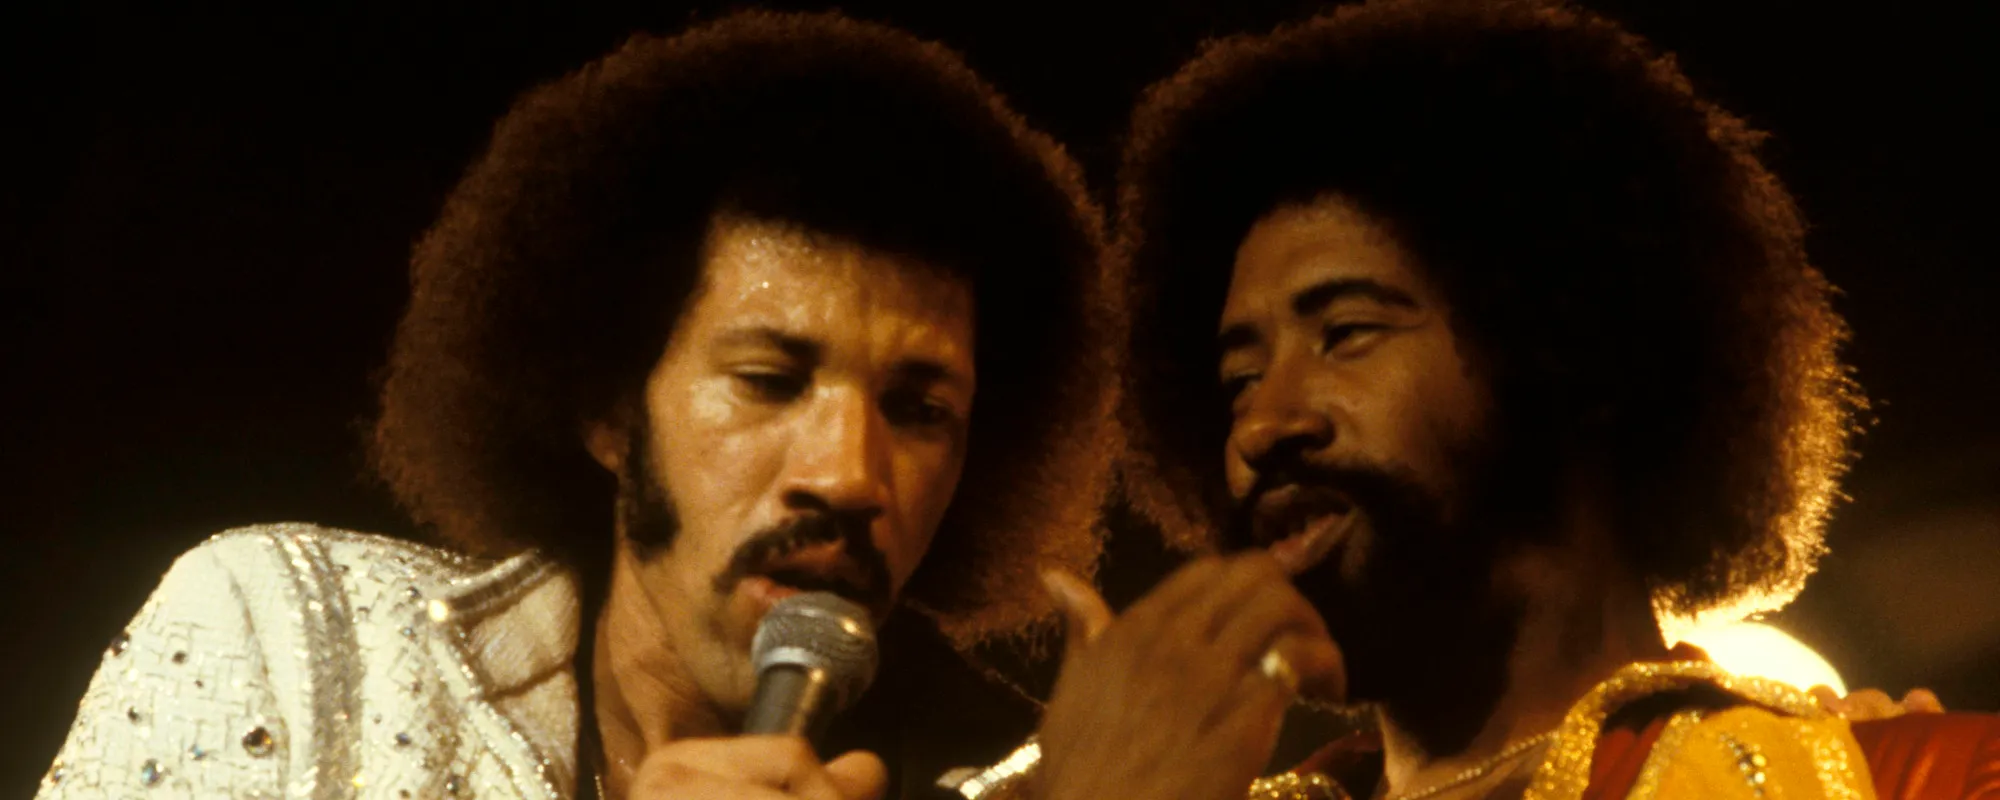 The Meaning Behind “Three Times a Lady” by The Commodores and How it Cemented Lionel Richie as a Love Song Legend